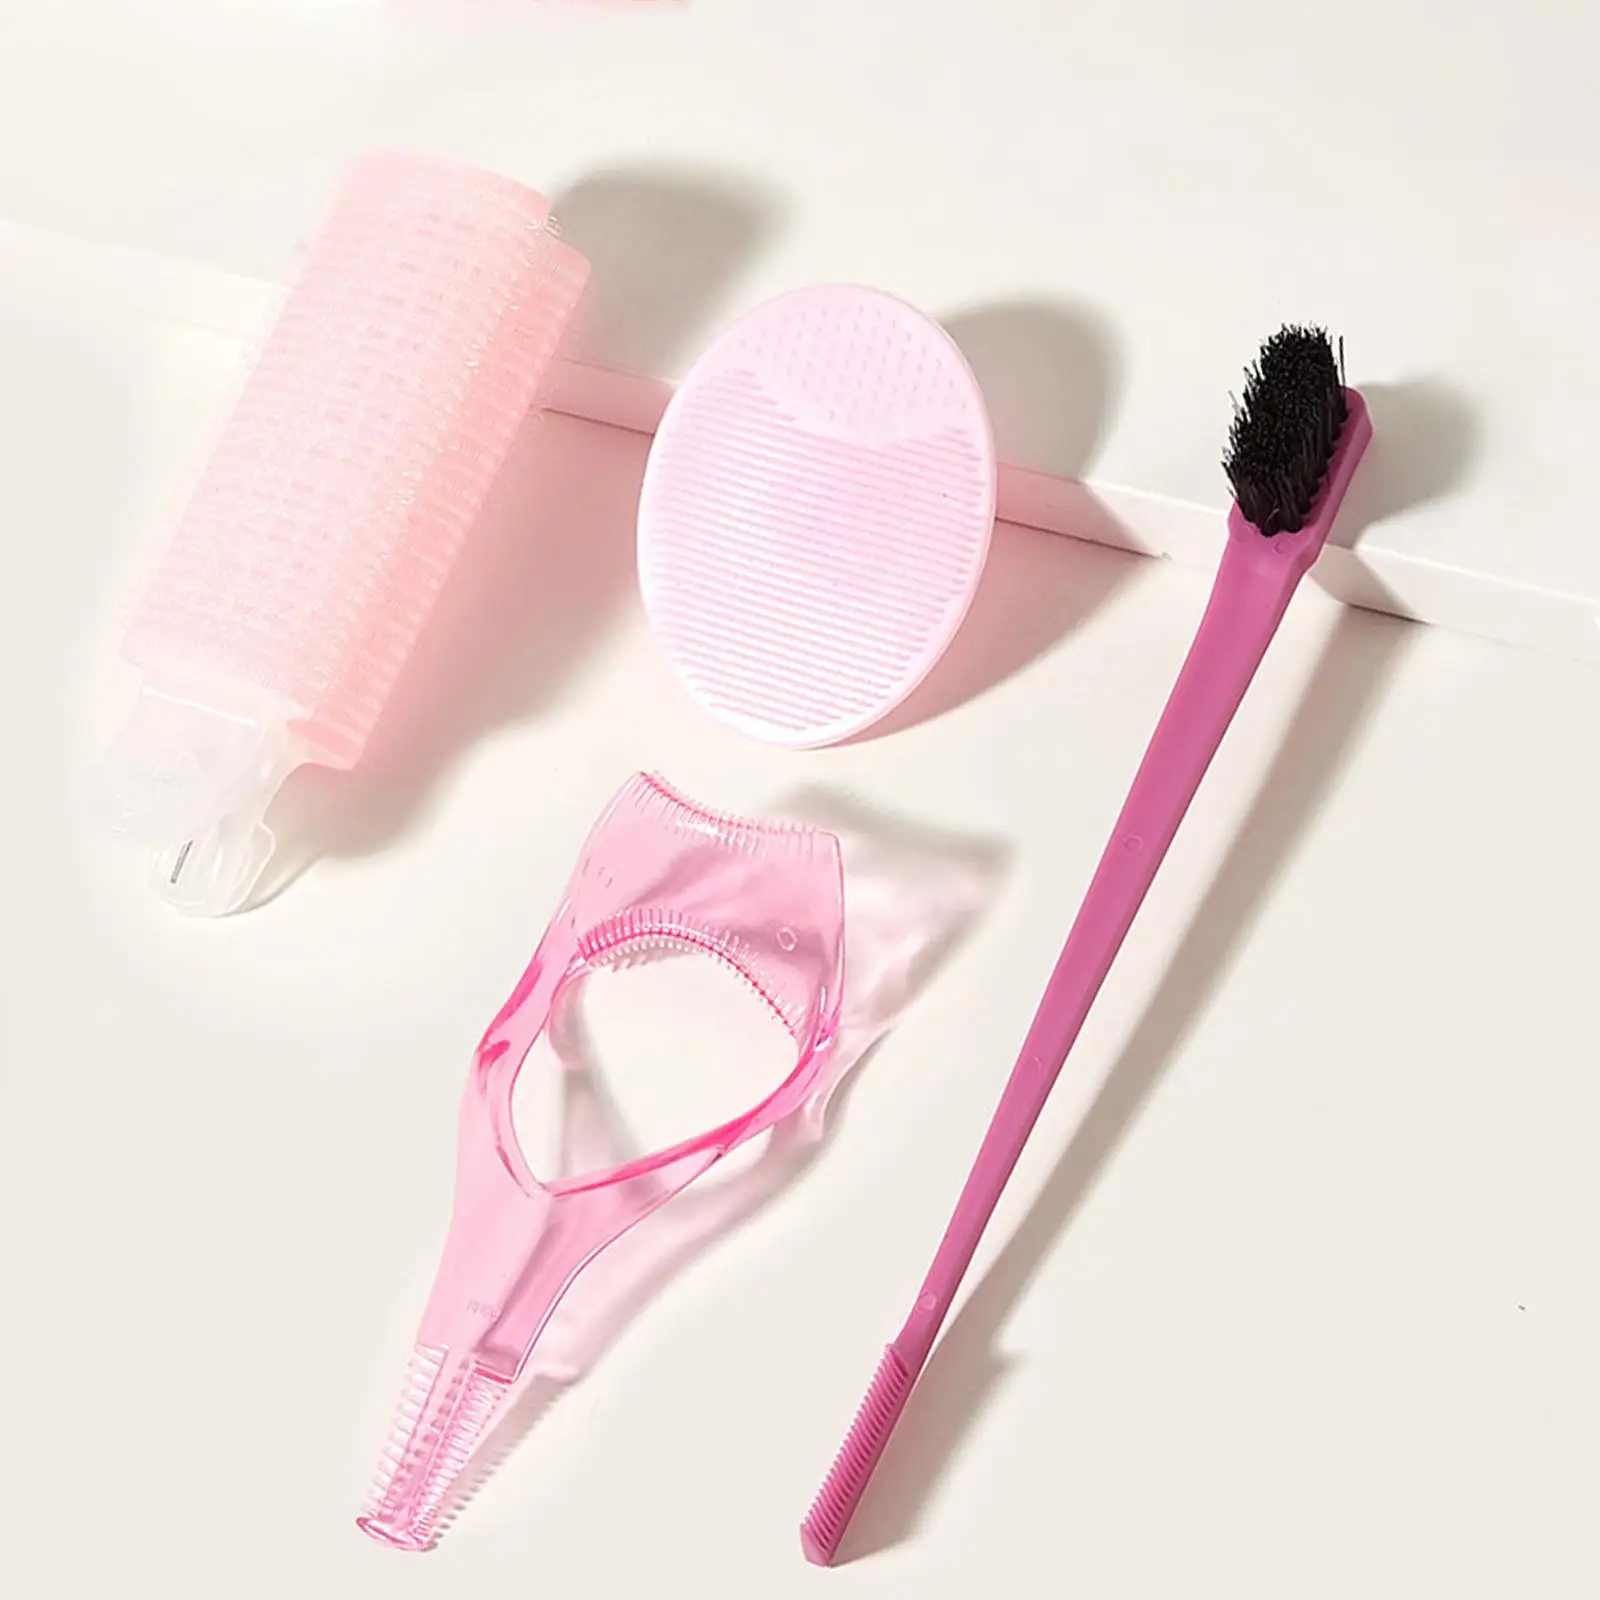 4 in 1 Makeup Set Hair Brush for Edge Facial Cleansing Massager Device Eyelash Brush Aid Lightweight Portable Compact for Travel